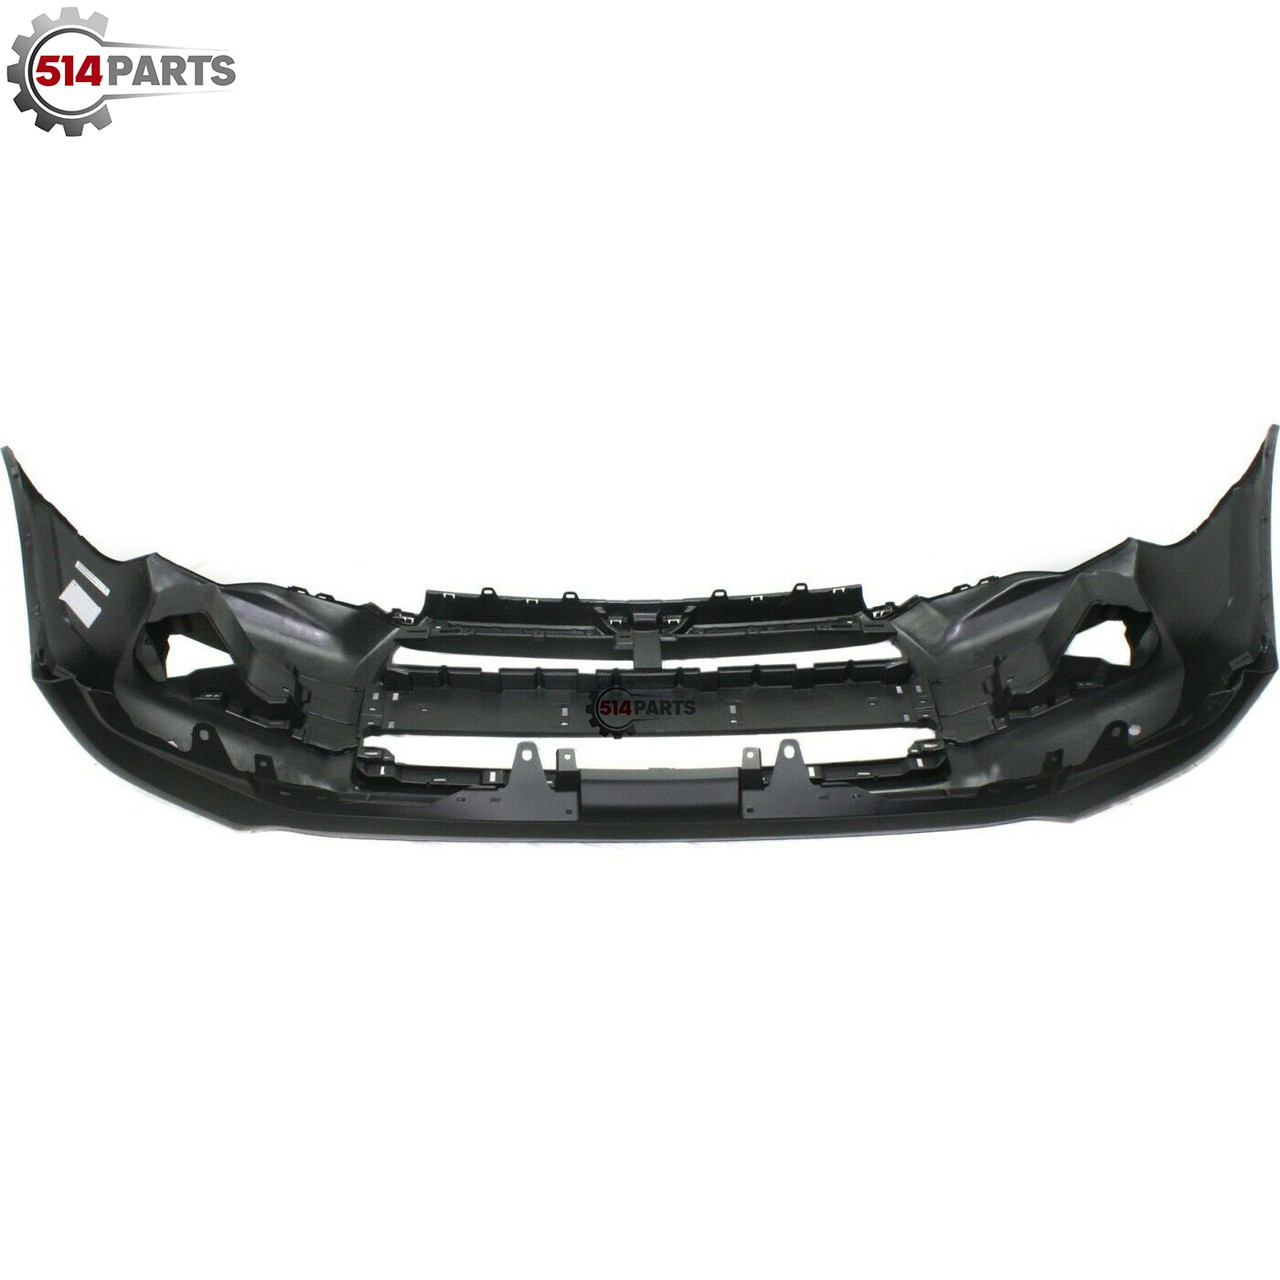 2014 - 2020 TOYOTA 4Runner SR5 and LIMITED with CHROME TRIM PRIMED FRONT BUMPER COVER with SENSOR HOLES - PARE-CHOC AVANT